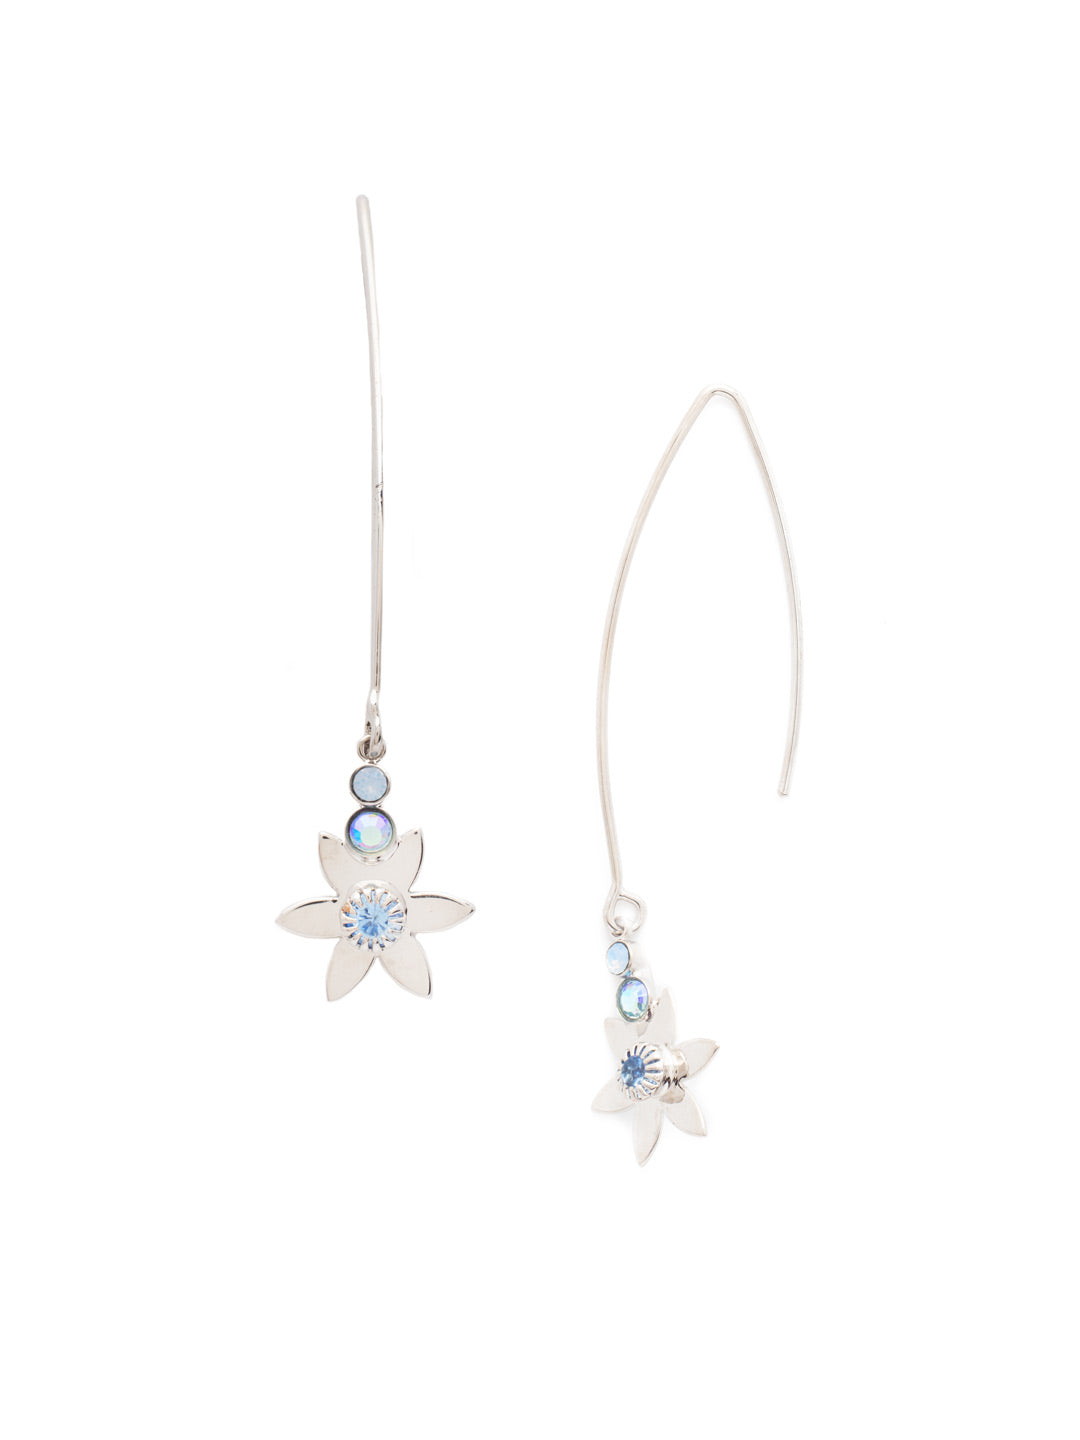 Abella Dangle Earrings - EEV12PDWNB - <p>Wear the Abella Dangle Earrings for a bit of floral, a bit of sparkle, and shiny metalwork, too. They've got it all and are perfect for spring. From Sorrelli's Windsor Blue collection in our Palladium finish.</p>